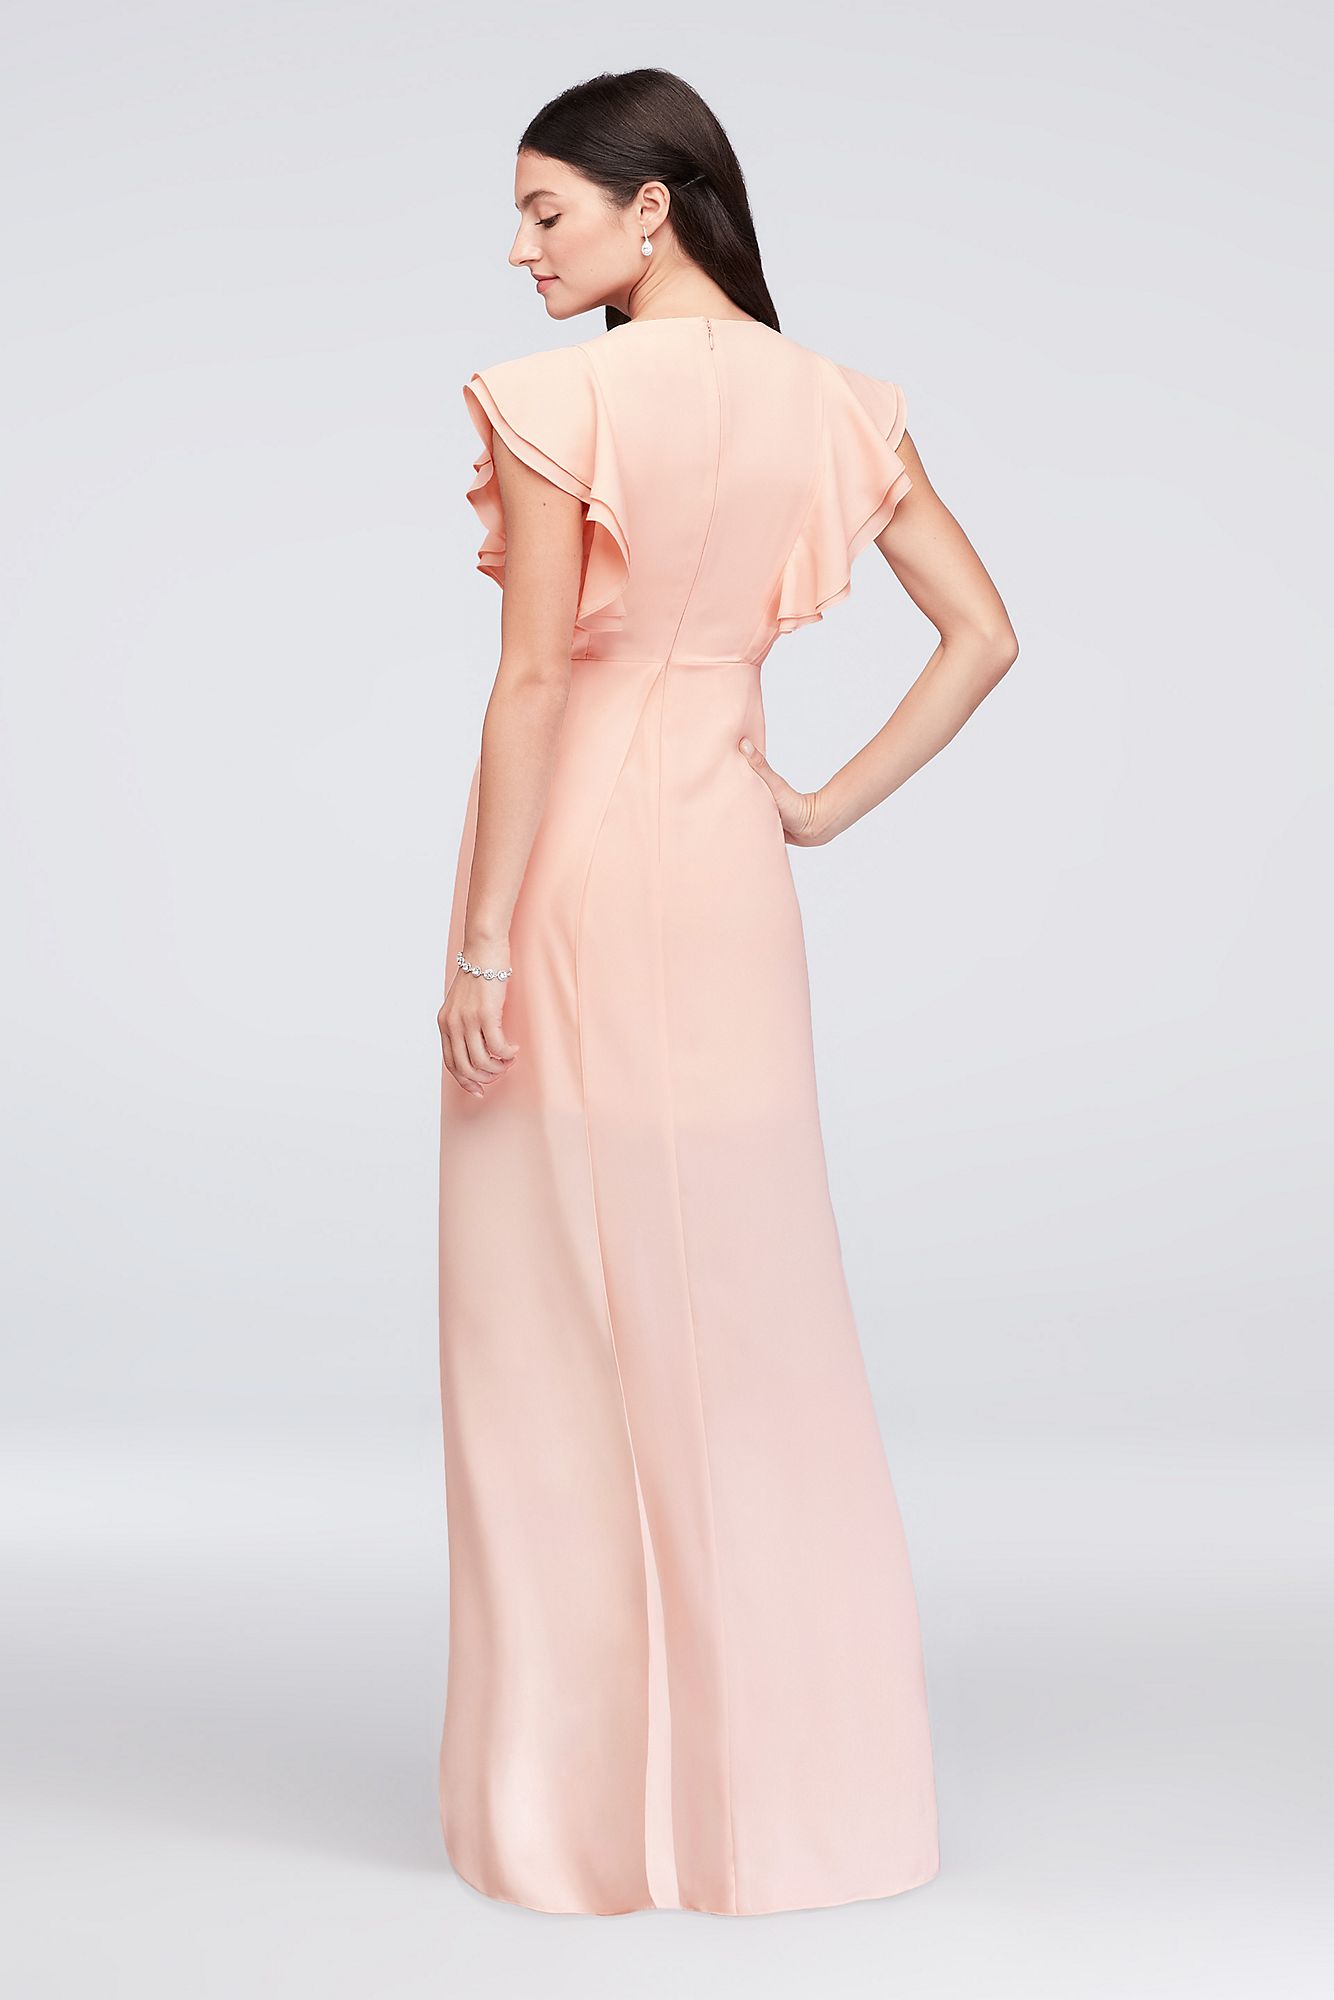 Chiffon Bridesmaid Dress with Flutter Sleeve Reverie 264210